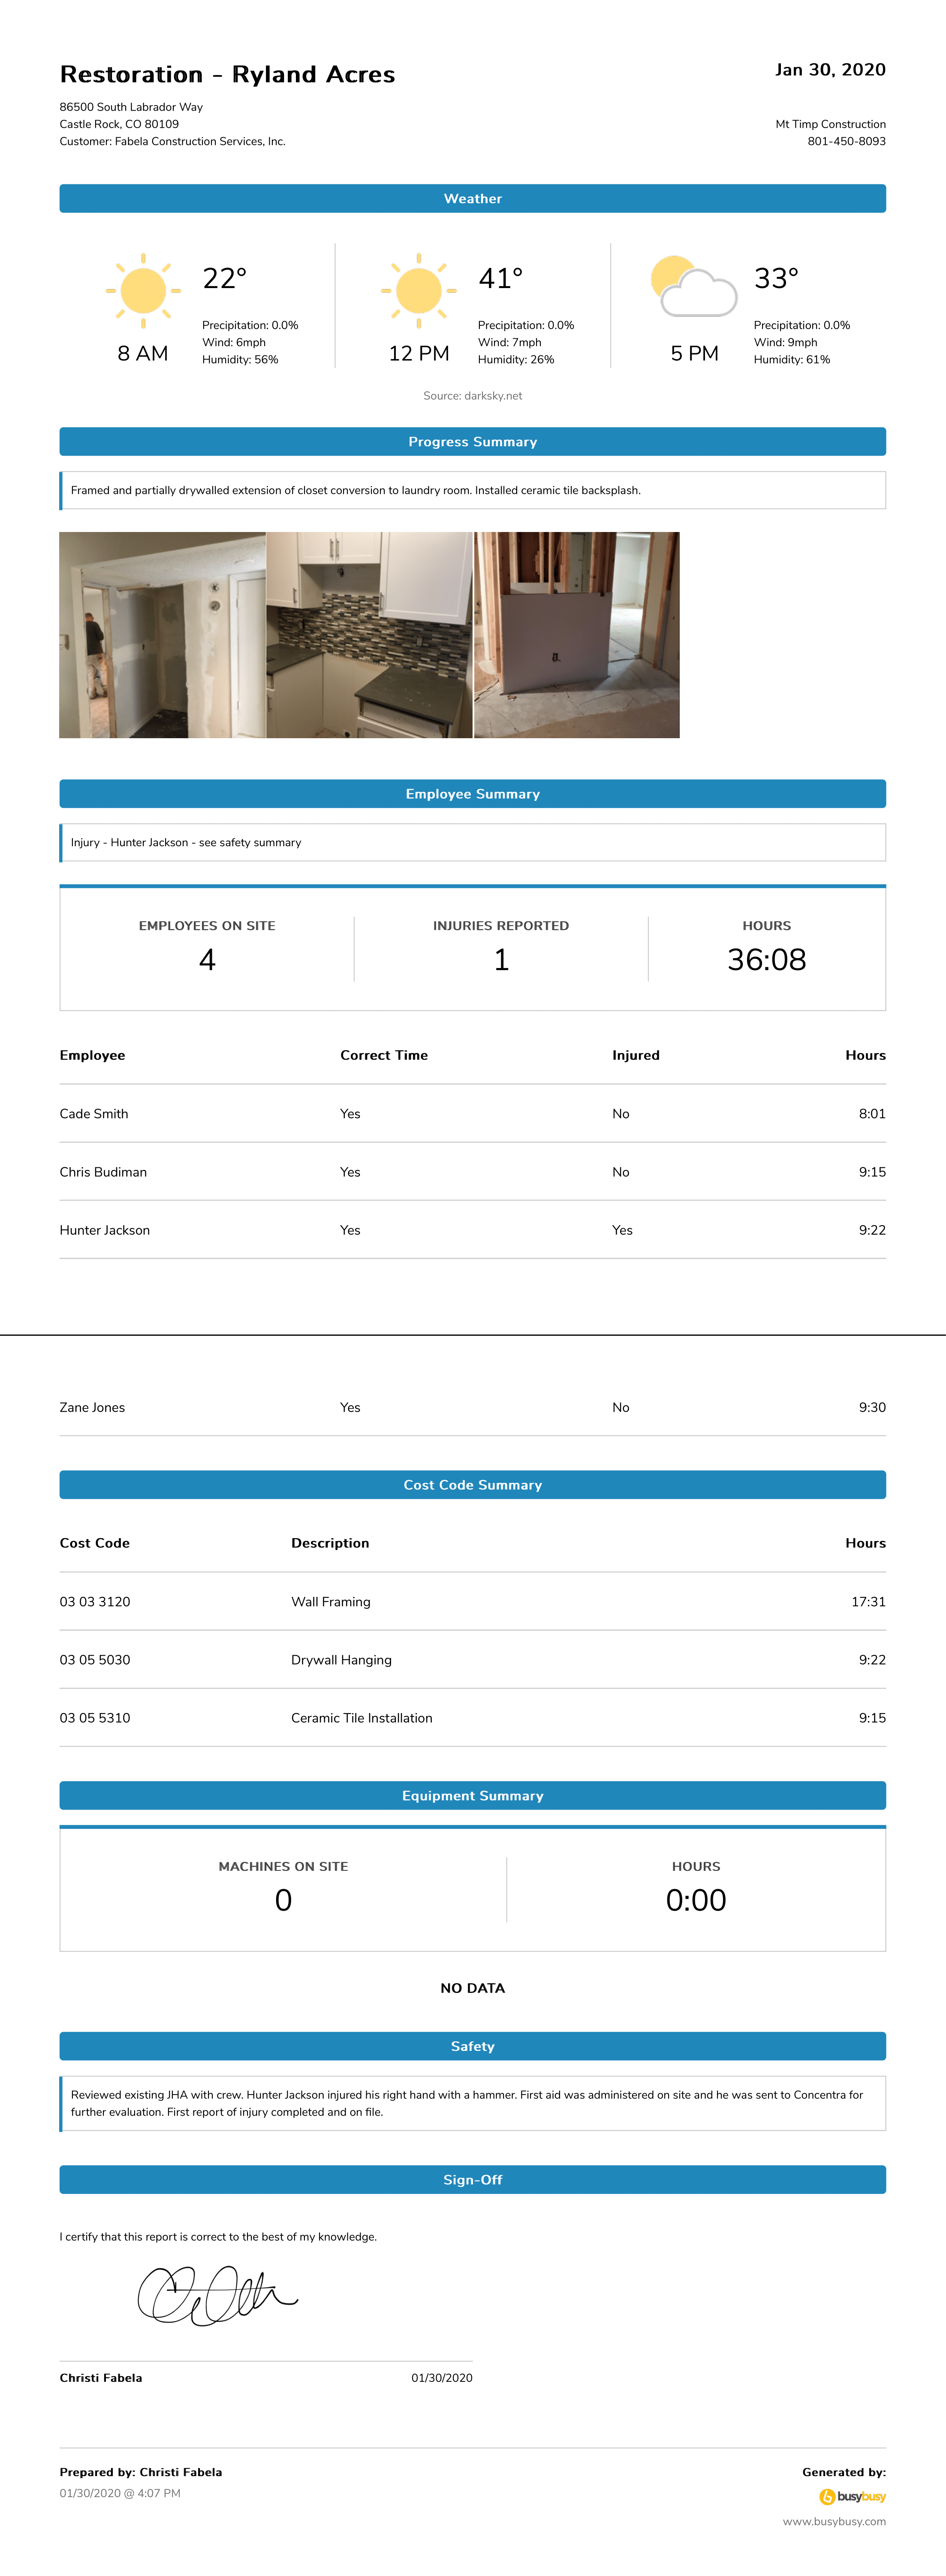 Restoration Daily Report